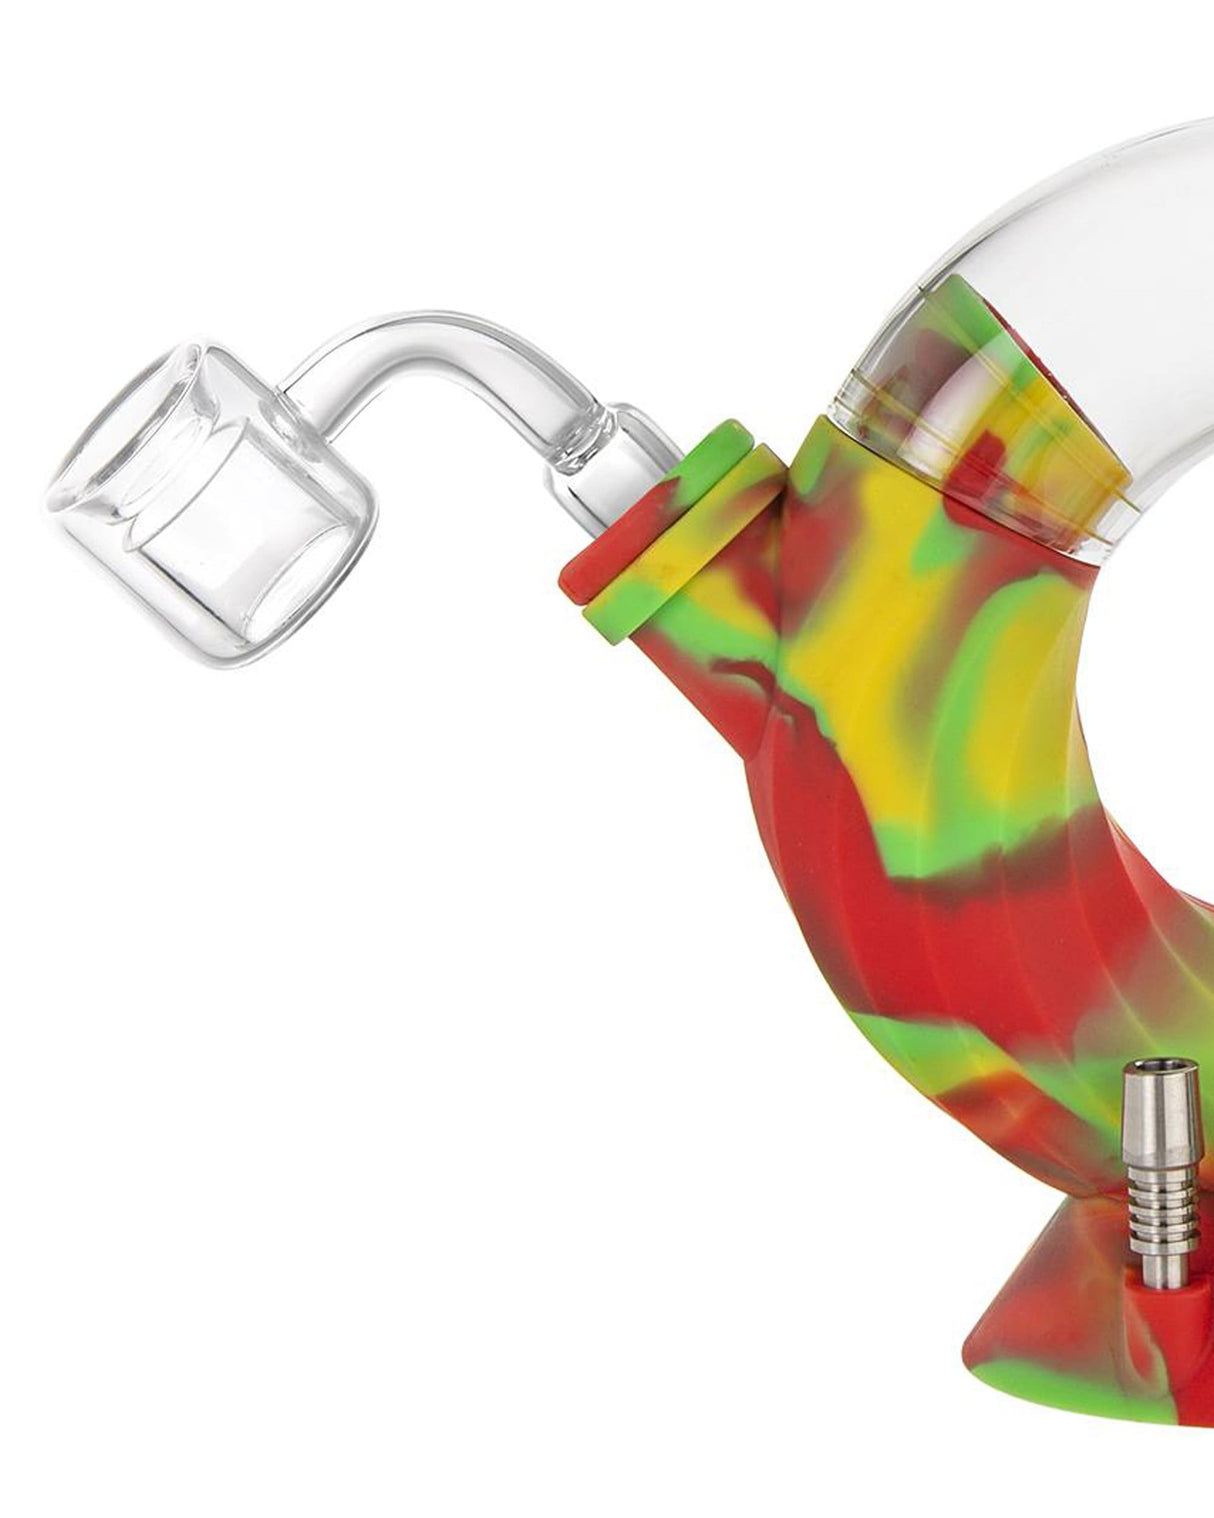 Ooze Ozone Silicone Bong close-up, multicolored design, with quartz banger and slitted percolator